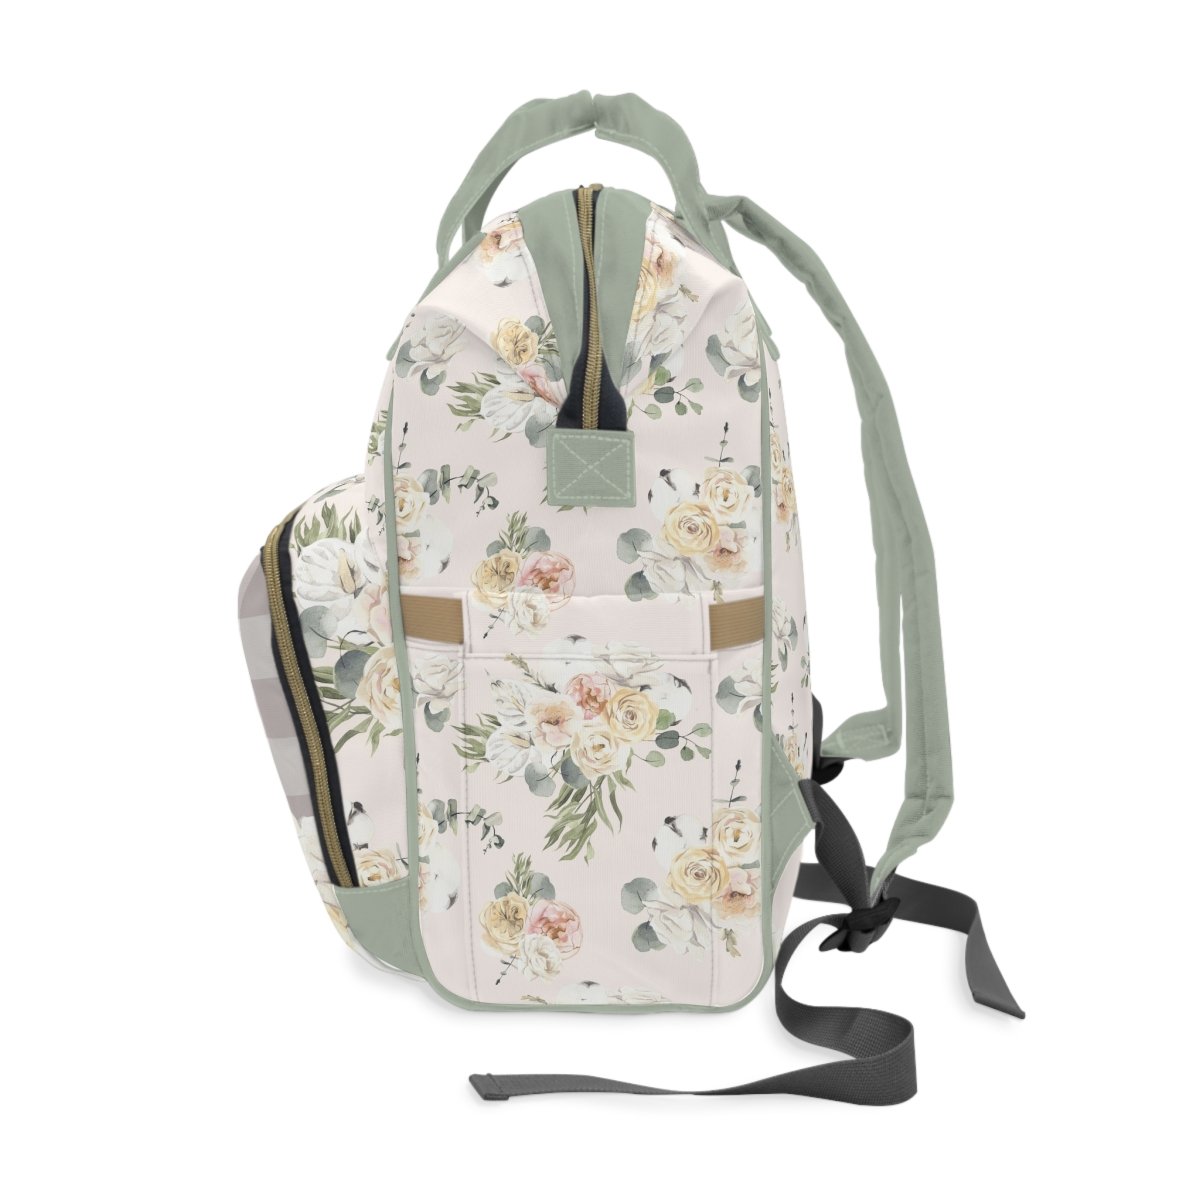 Farmhouse Floral Personalized Backpack Diaper Bag - Farmhouse Floral, gender_girl, text